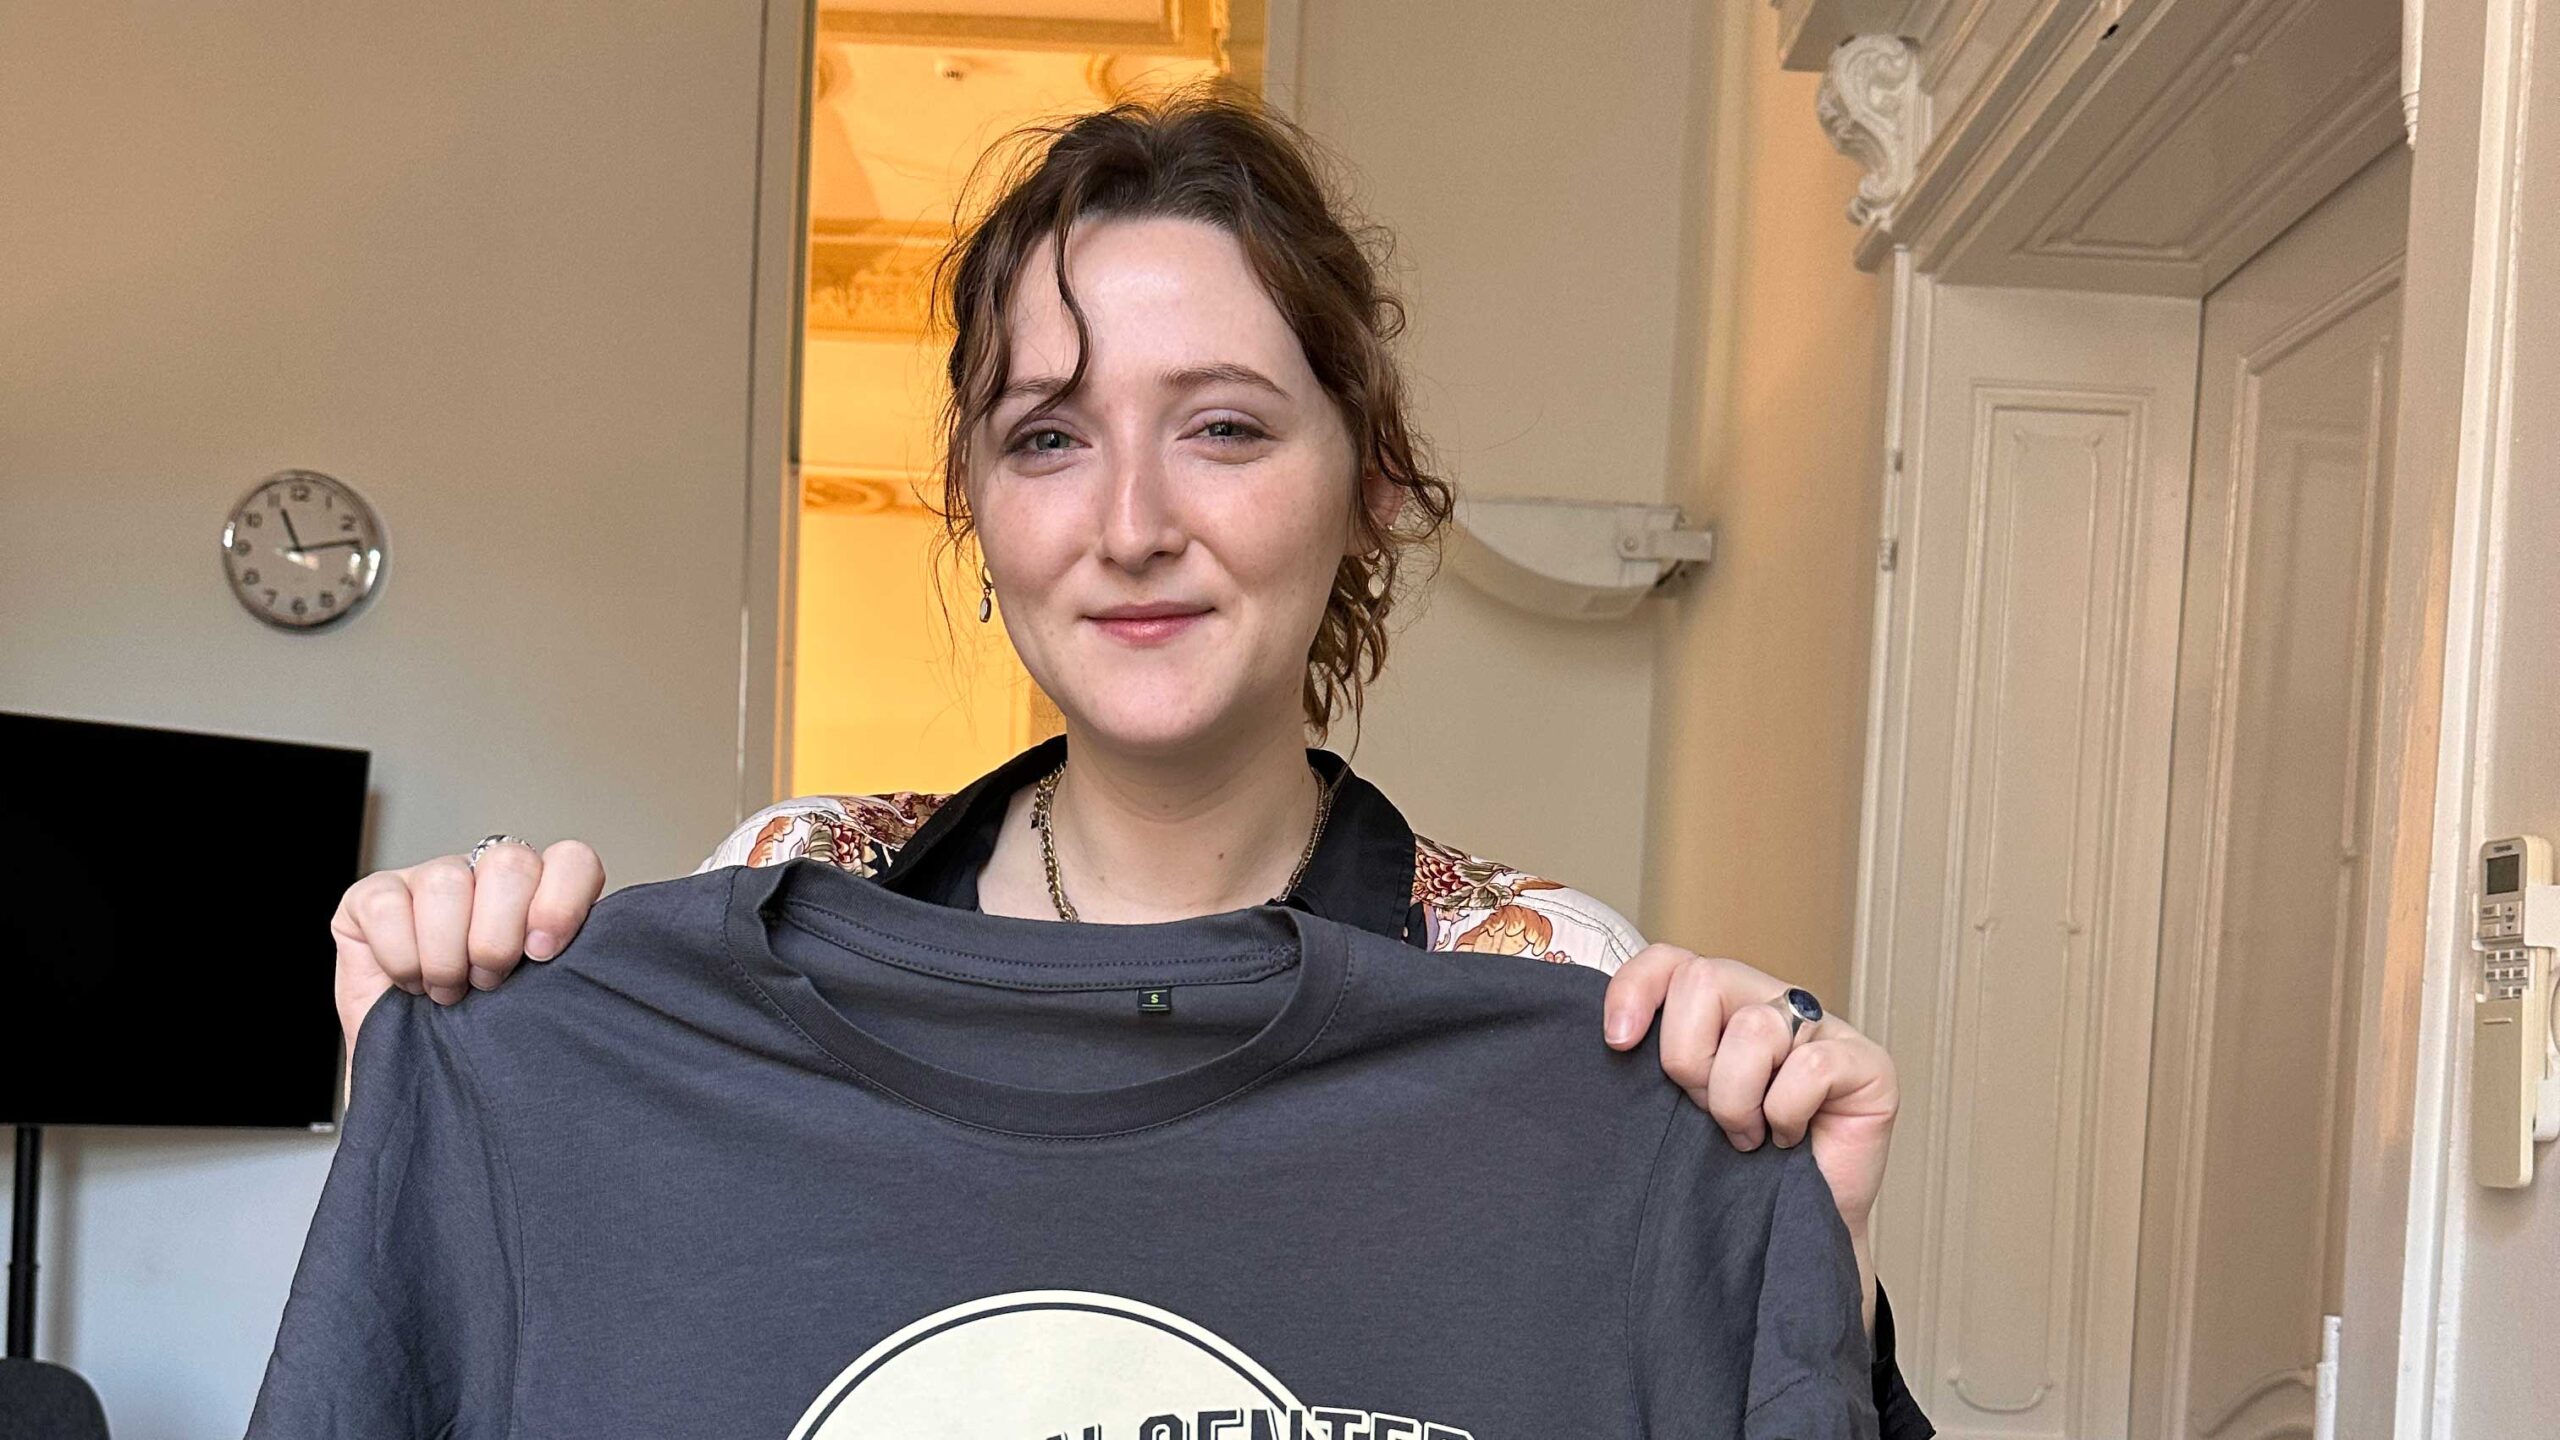 Sadie holding a newly arrived tshirt with the design of the Center which she had designed.